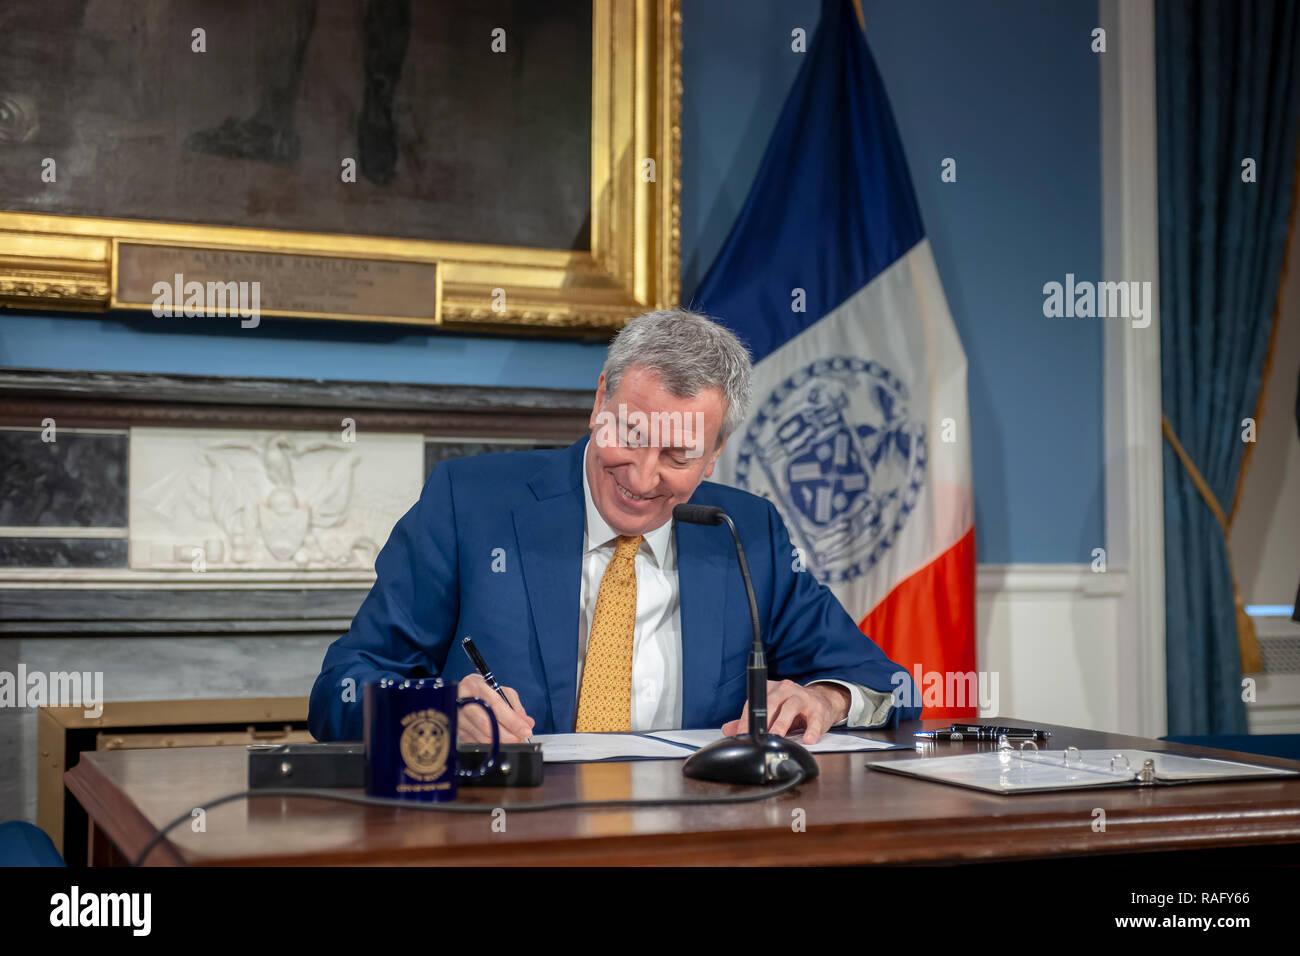 New York Mayor Bill de Blasio at a bill signing in New York City Hall on Wednesday, January 2, 2019. The mayor signed into law legislation that enables stronger campaign finance laws (Intro. 1288) and one that formerly sets the date, February 29, 2019, for the Public Advocate Special Election. (© Richard B. Levine) Stock Photo